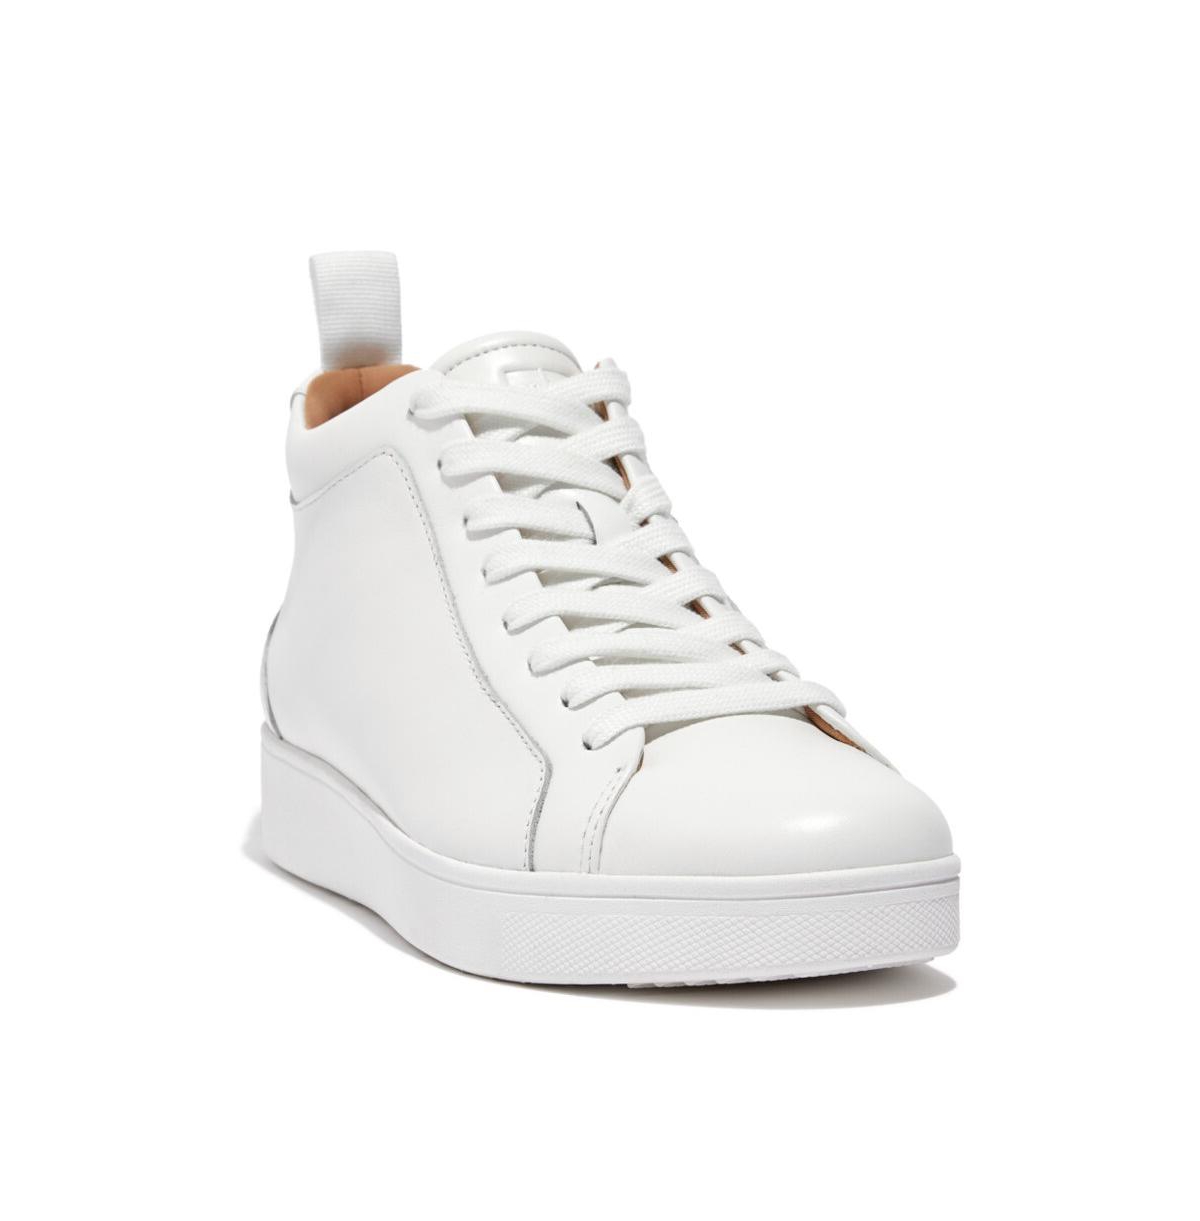 FITFLOP WOMEN'S RALLY LEATHER HIGH-TOP TRAINERS